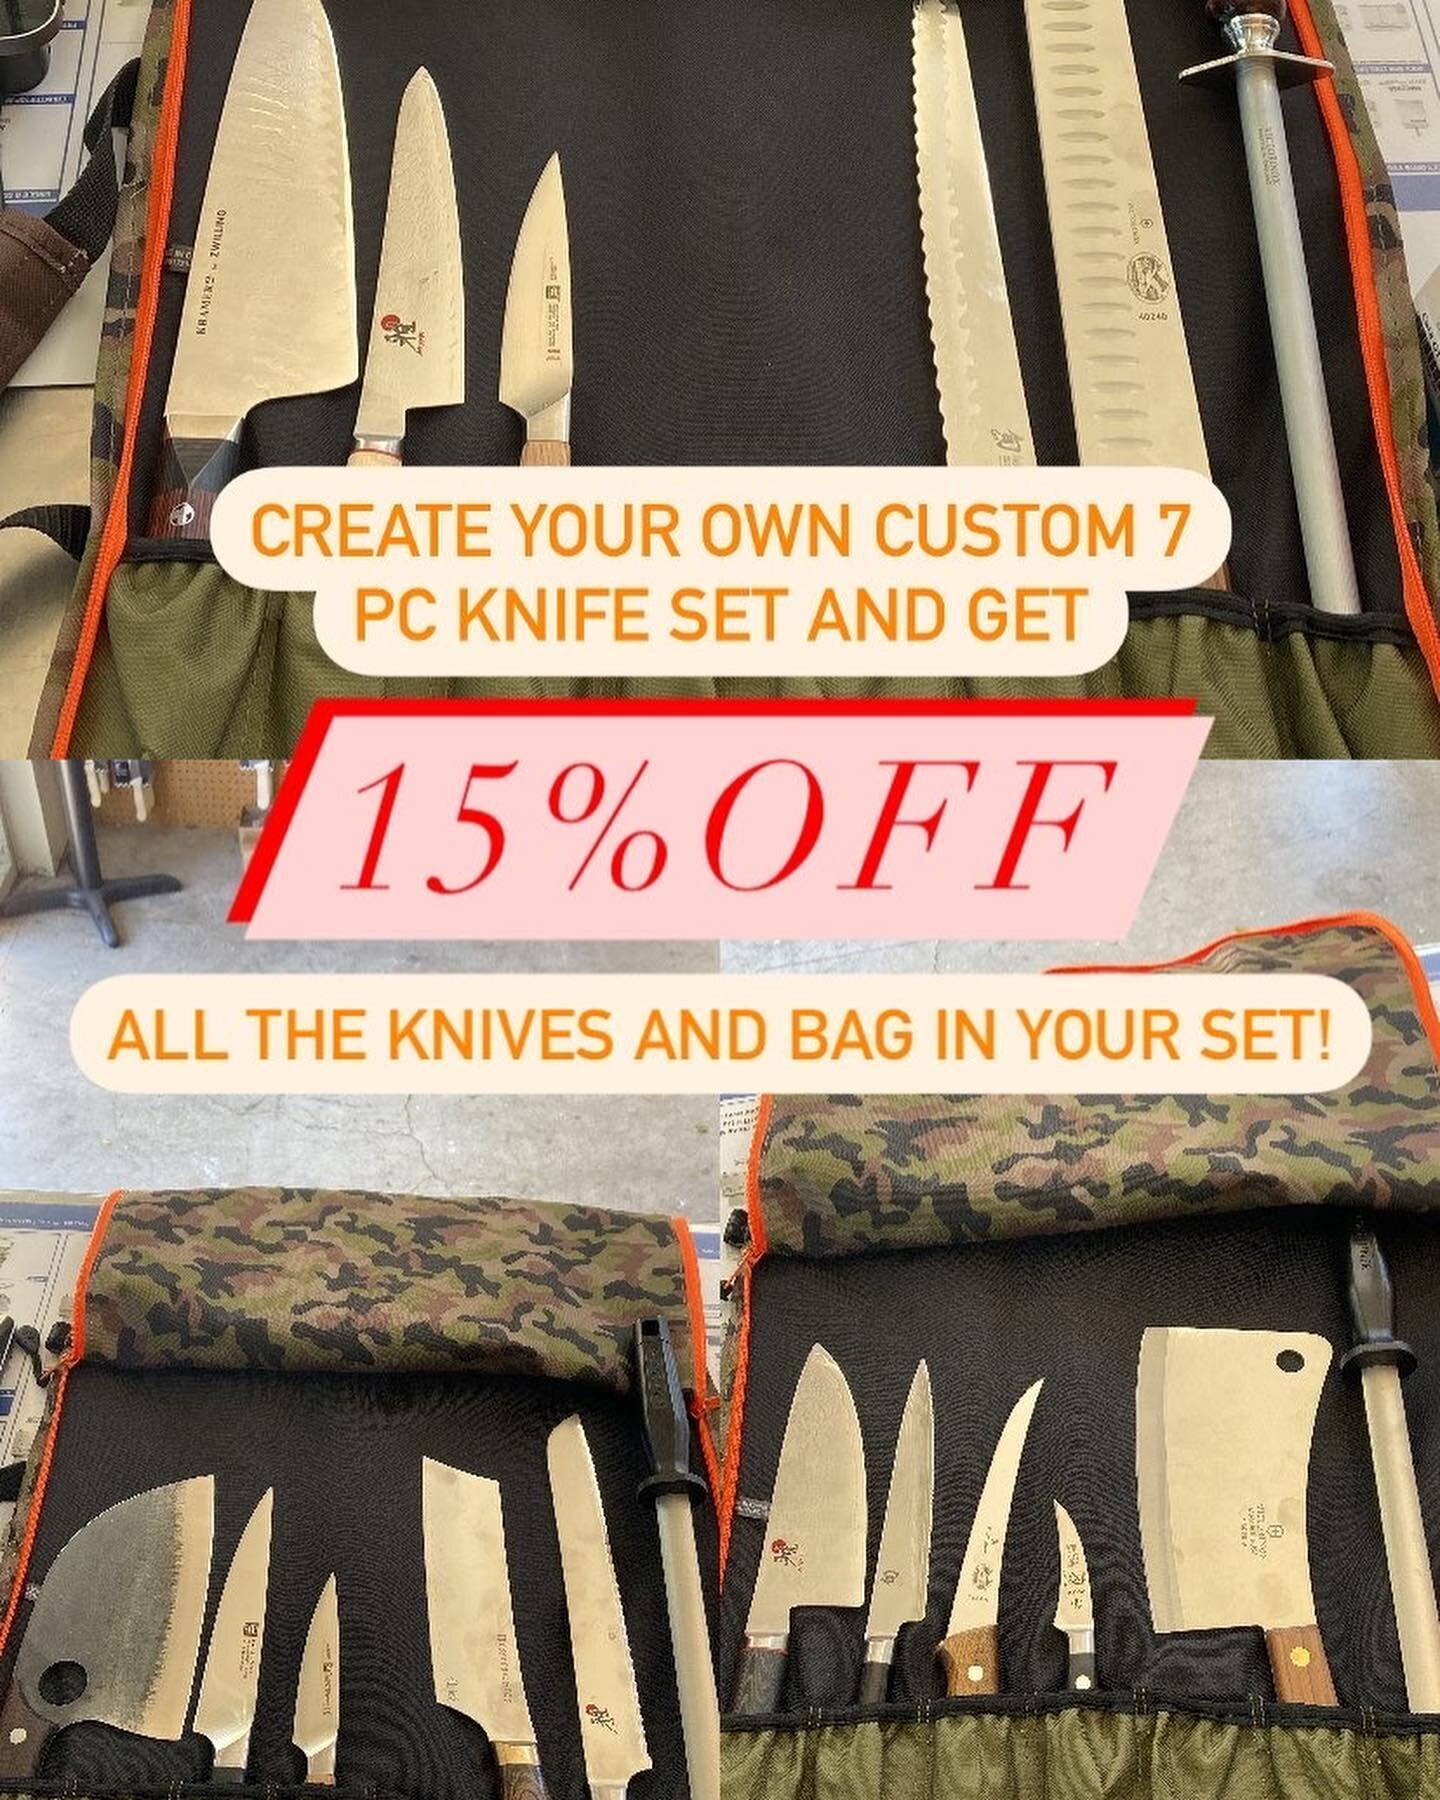 Time to celebrate‼️ It&rsquo;s BYOB (Build Your Own Bag) at CHOP😁🥳

Get 15 percent off your own custom 7pc bag with our knives and bags available in store! 
.
Offer available in SM and SLO!
.
.
.

#california #sanluisobispo #slocal #centralcoast 
#